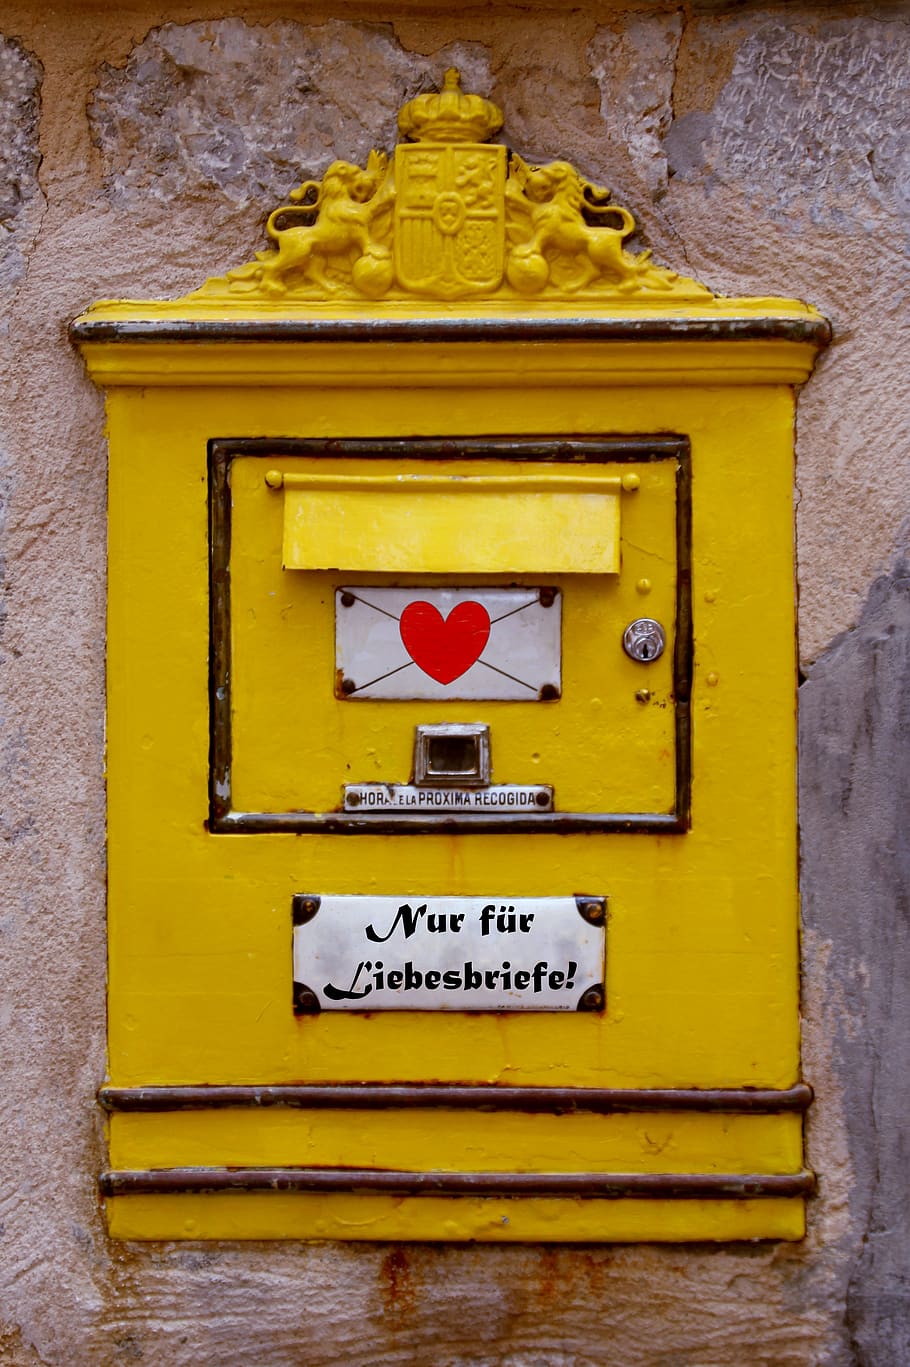 mailbox, love letters, heart, love, post, letters, send, yellow, vintage, declaration of love